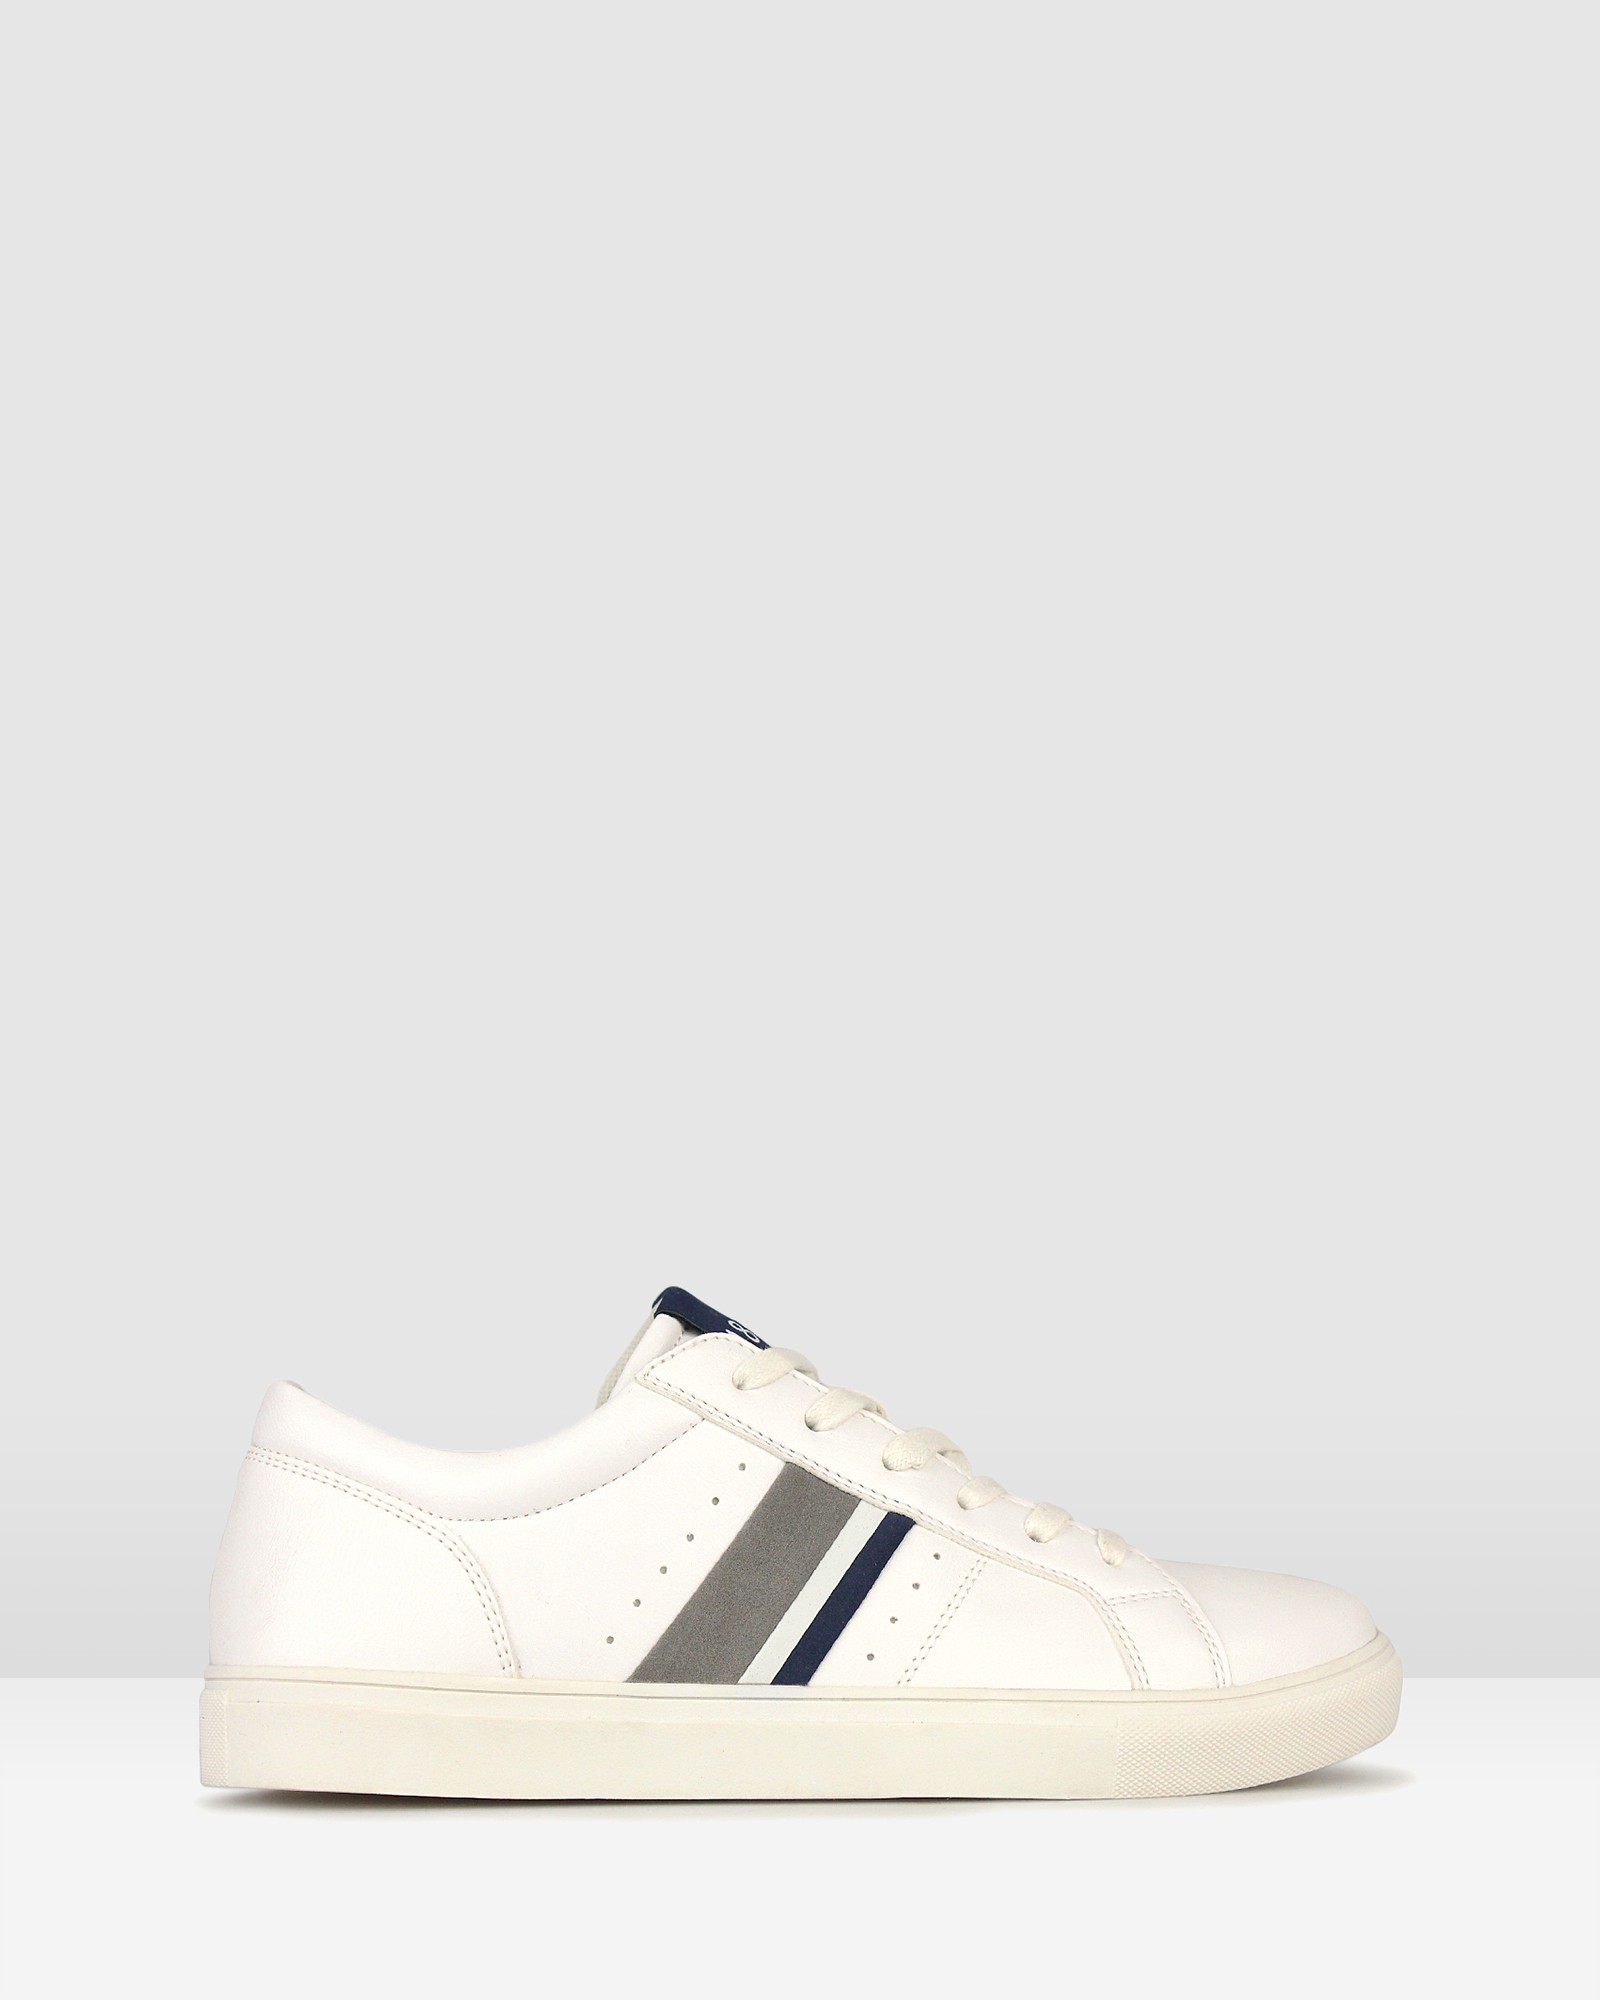 Nate Low Top Lifestyle Sneakers White by Betts | ShoeSales